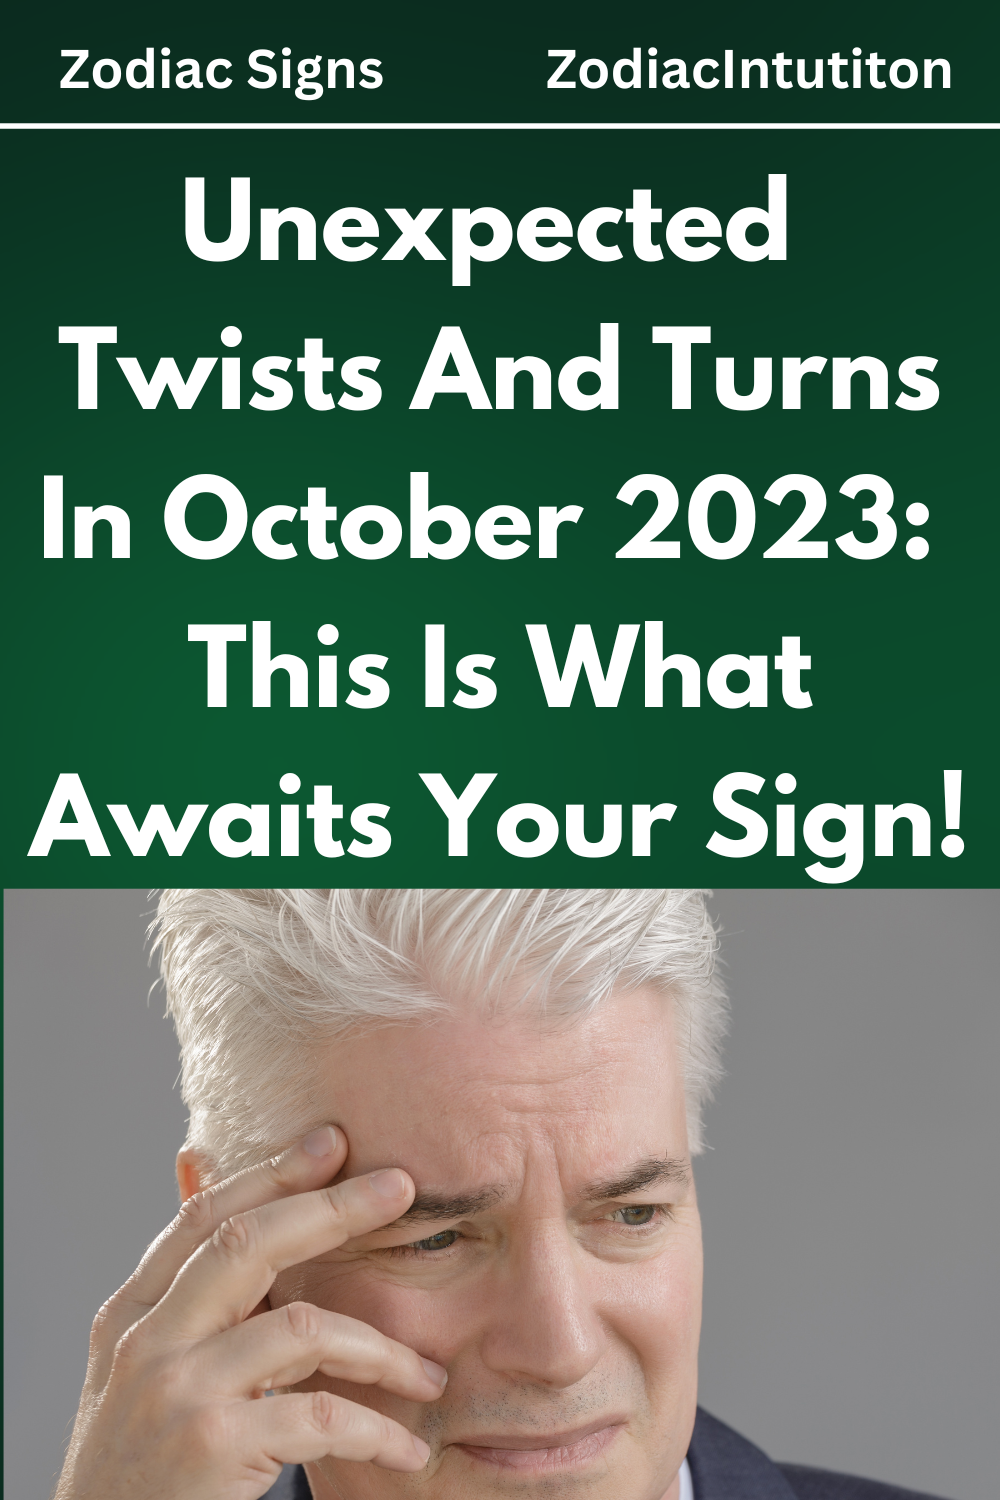 Unexpected Twists And Turns In October 2023: This Is What Awaits Your Sign!